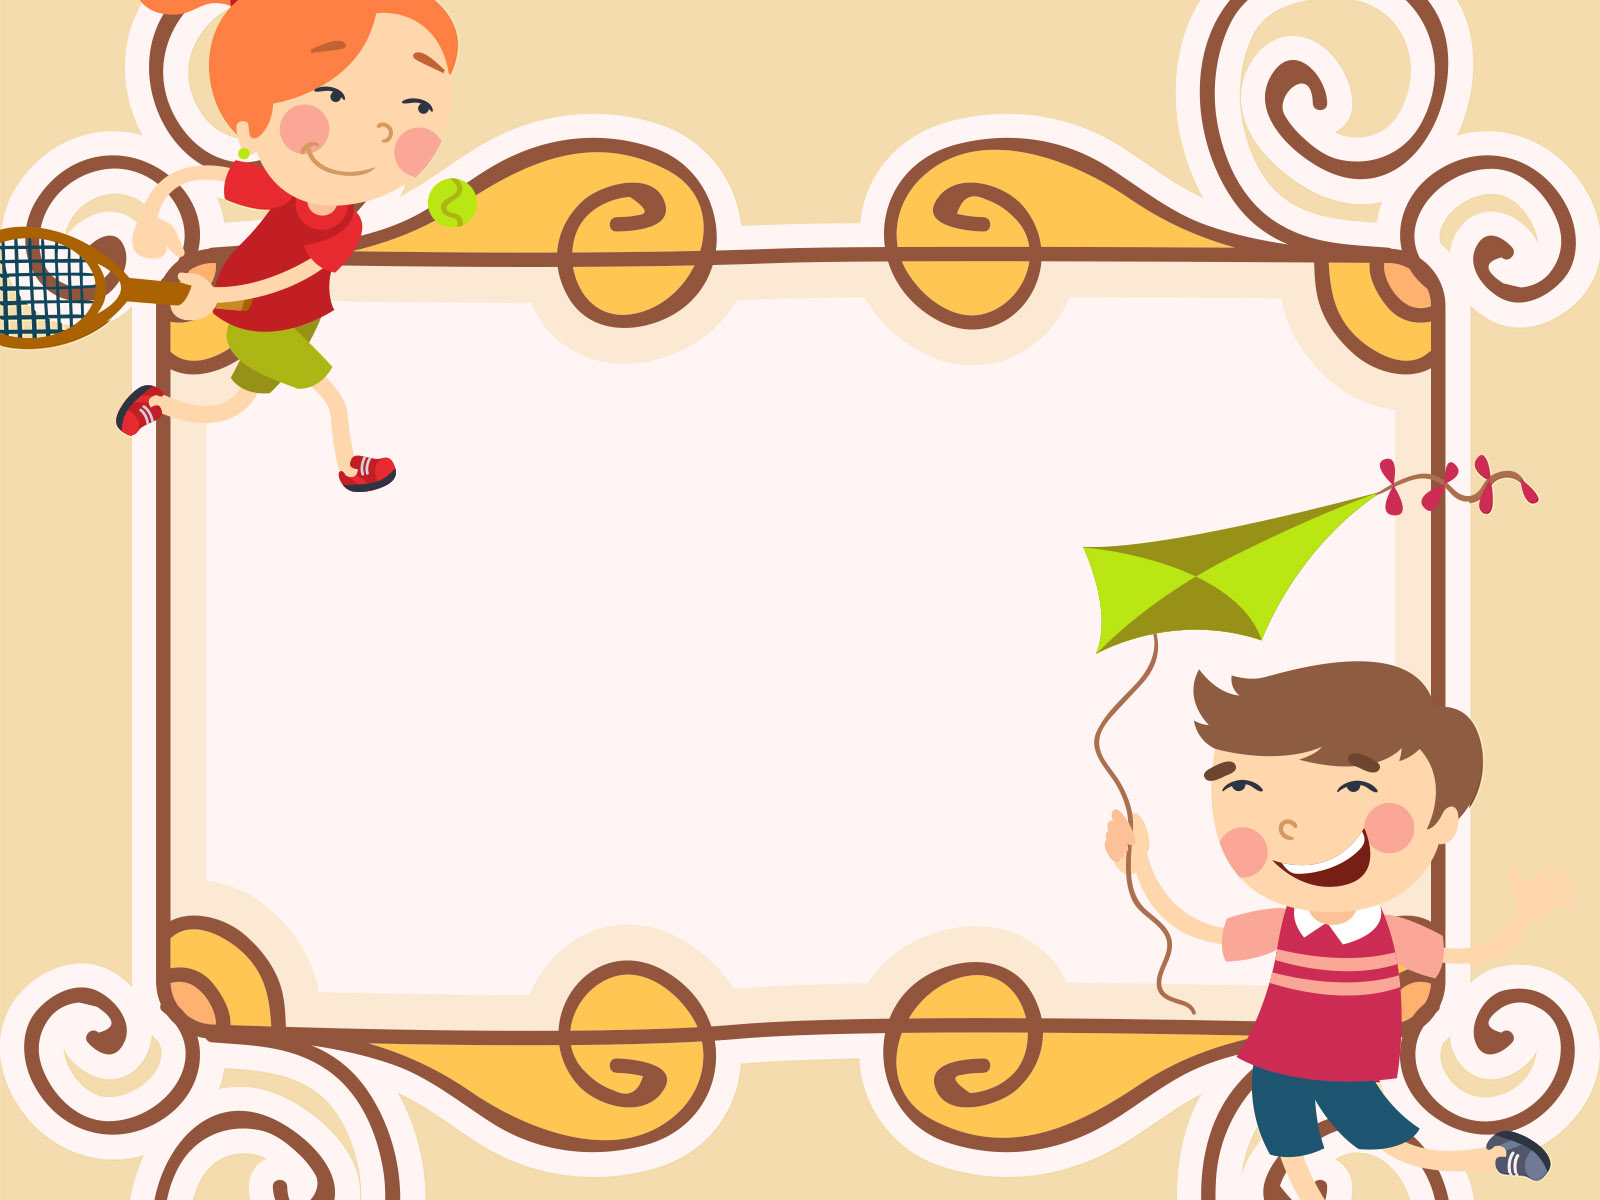 Sweet Cartoon Photo Frame Powerpoint Templates - Border & Frames, Brown,  Education, Kids - Free PPT Backgrounds and Templates